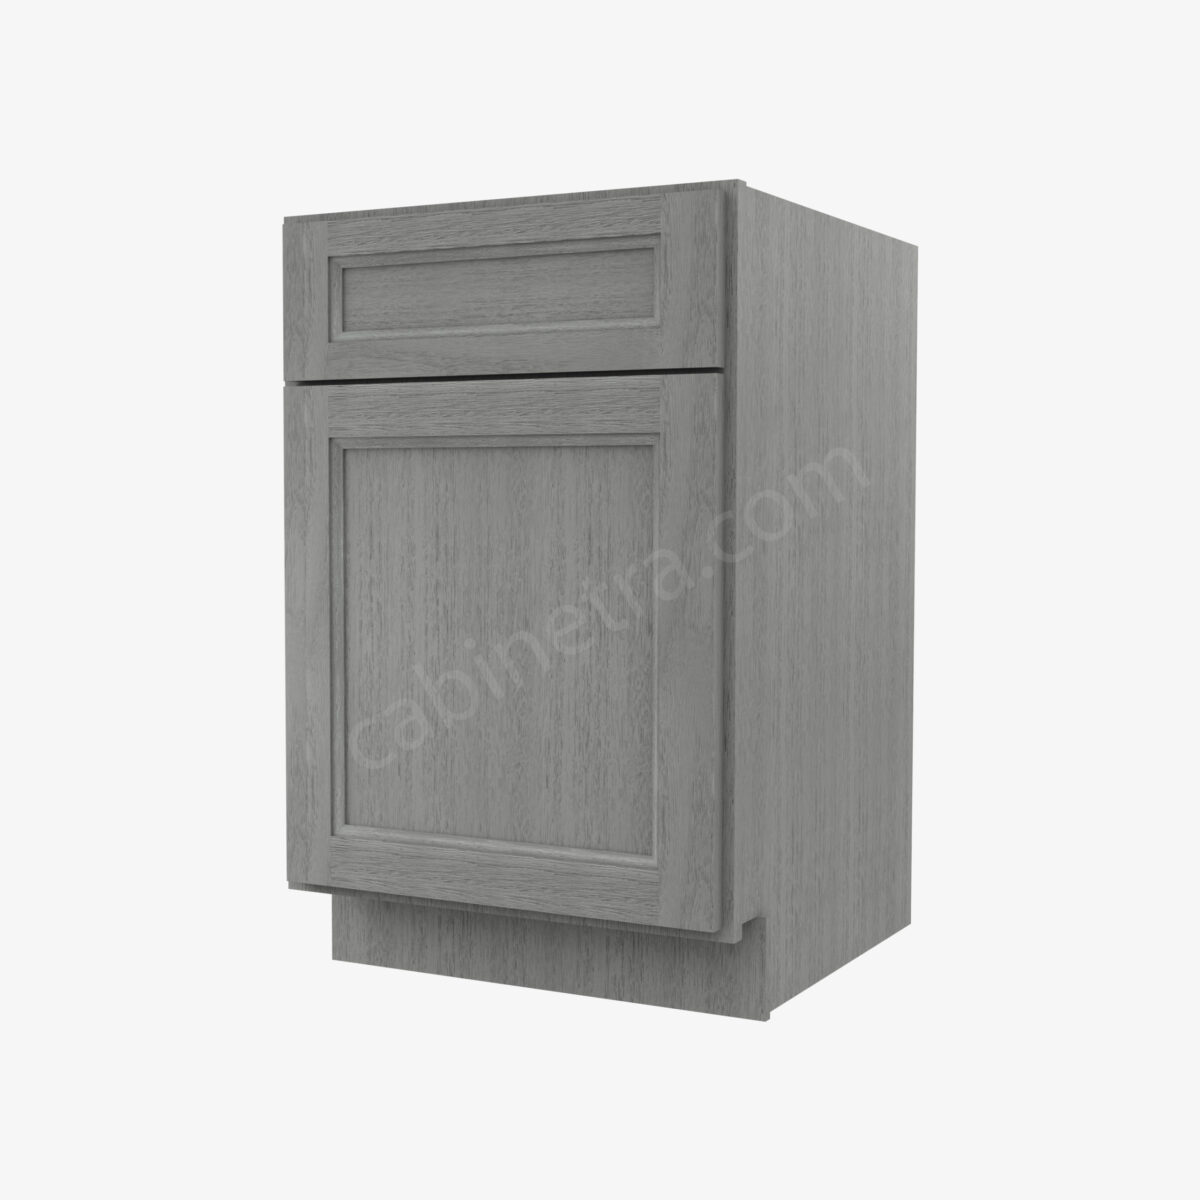 TG B21 0 Forevermark Midtown Grey Cabinetra scaled